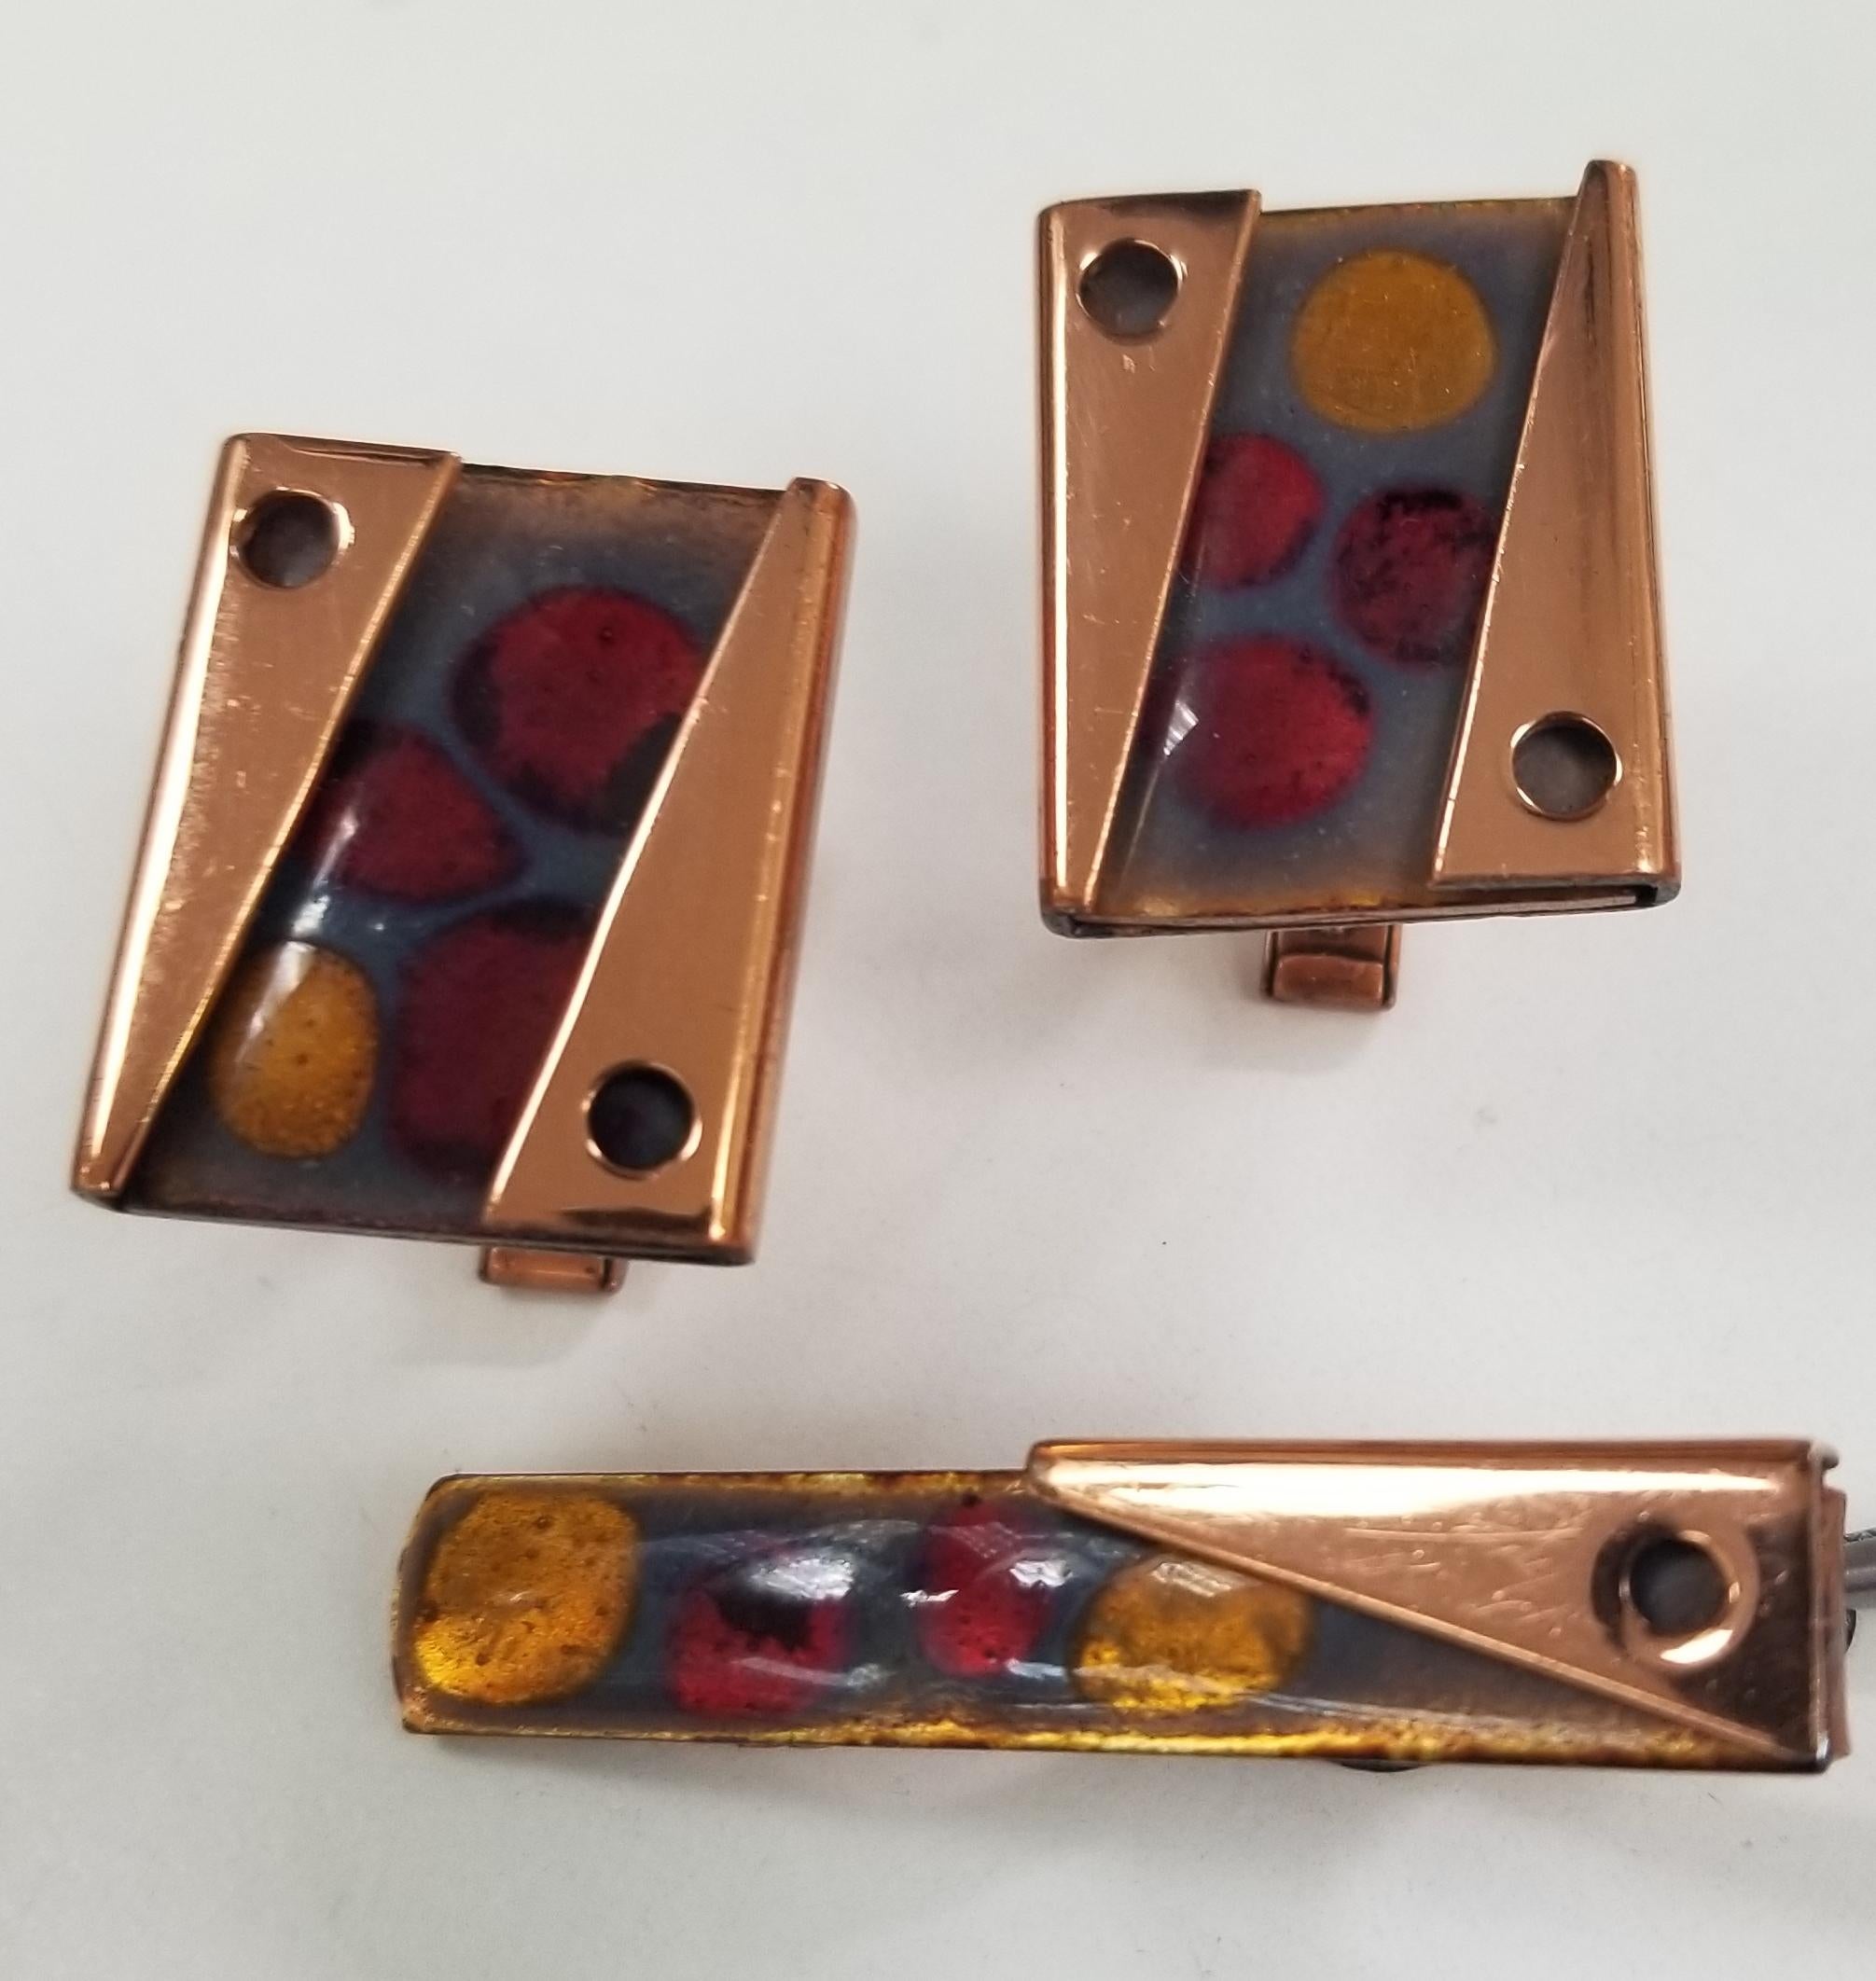 Matisse Rare Set of Vintage 1950s Abstract Modernist Enamel on Copper Cuff Link 5